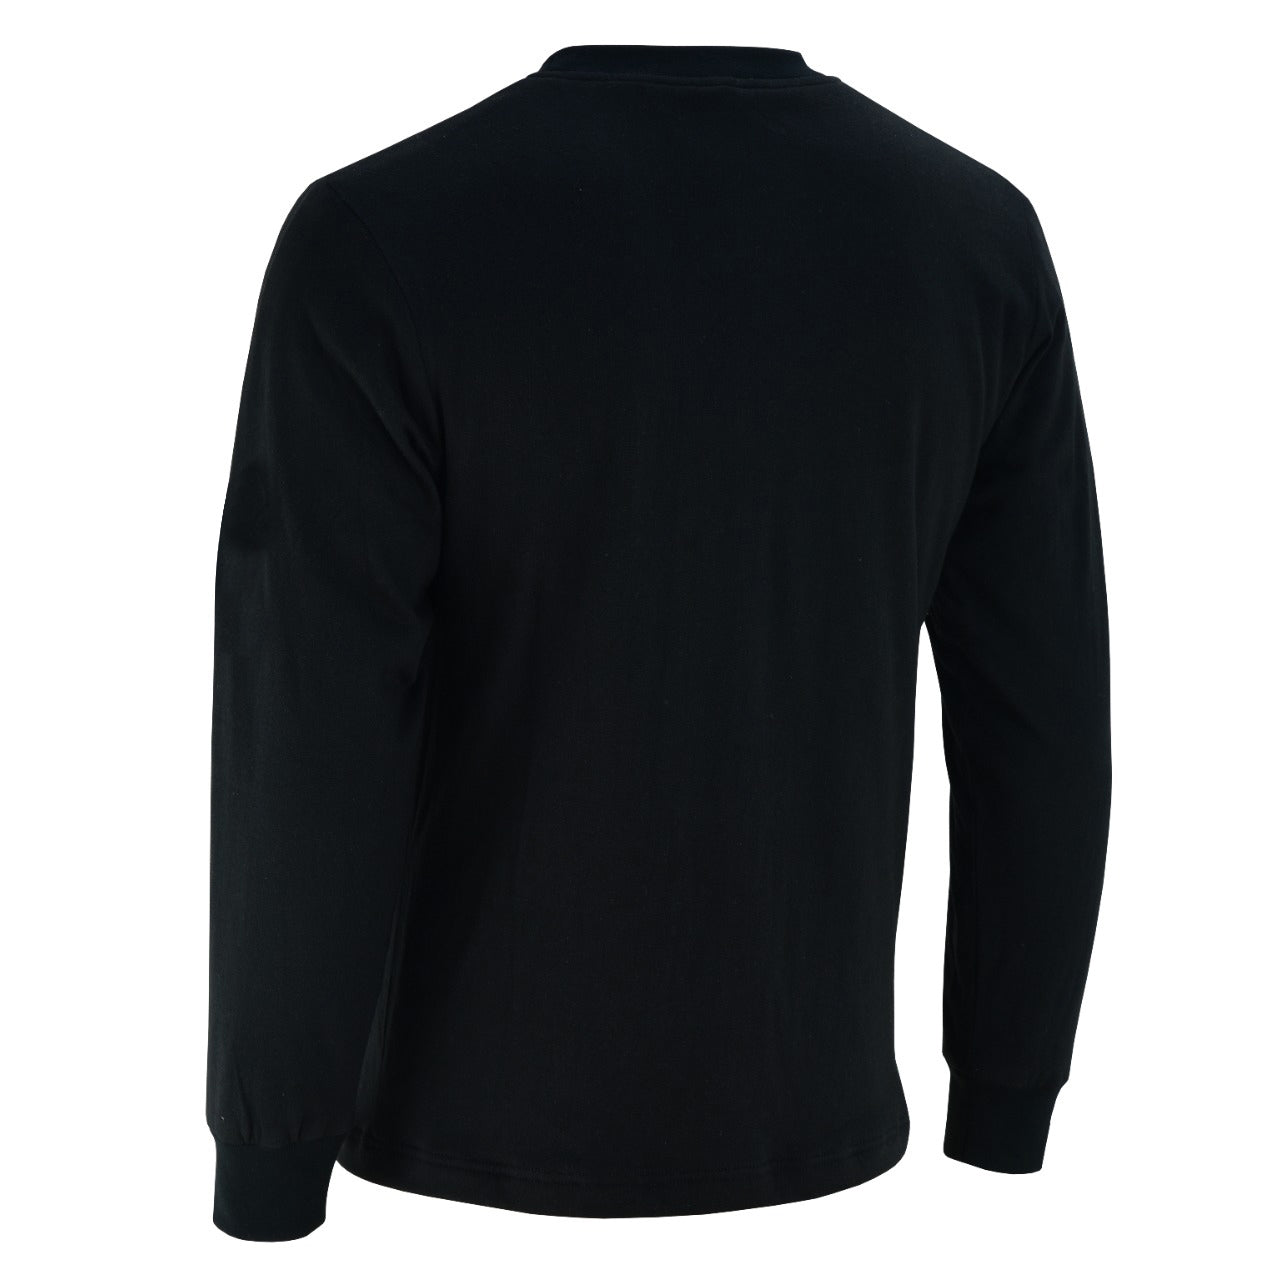 Men's Hume Protective Long Sleeve T-Shirt